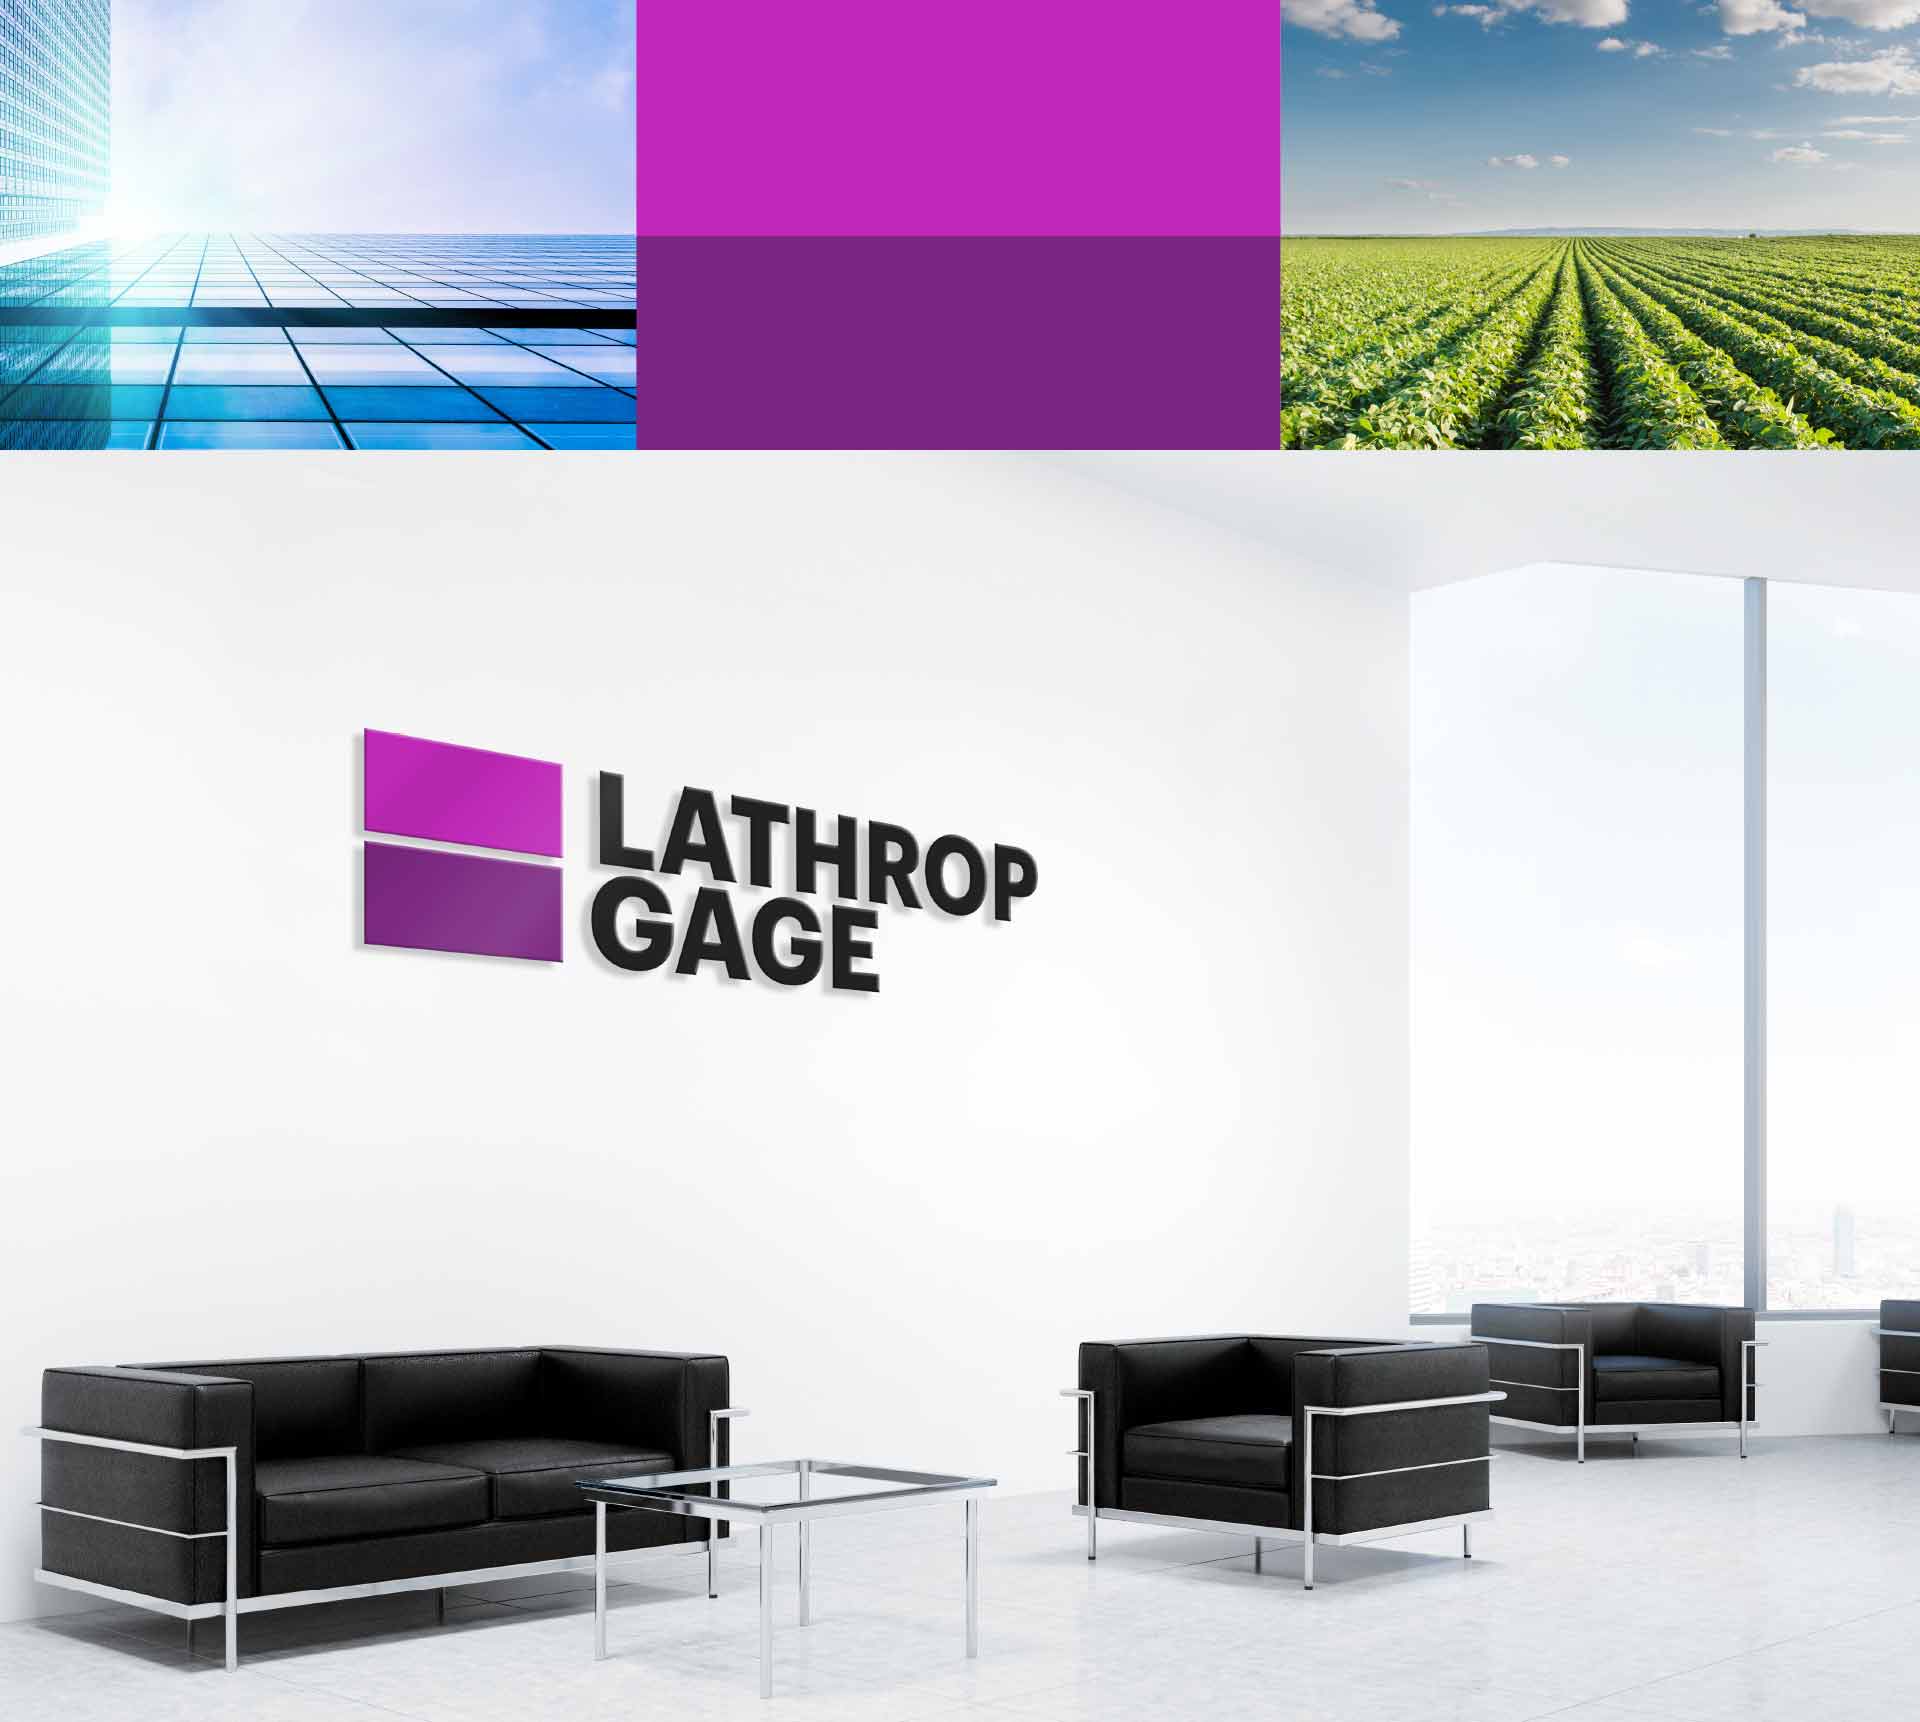 lathrop gage waiting room with skybean field and sky scraper image